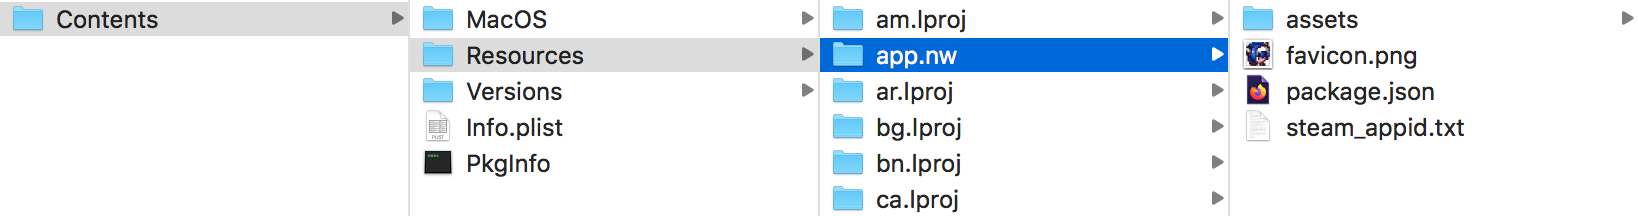 Macos-package-contents-app-nw.png